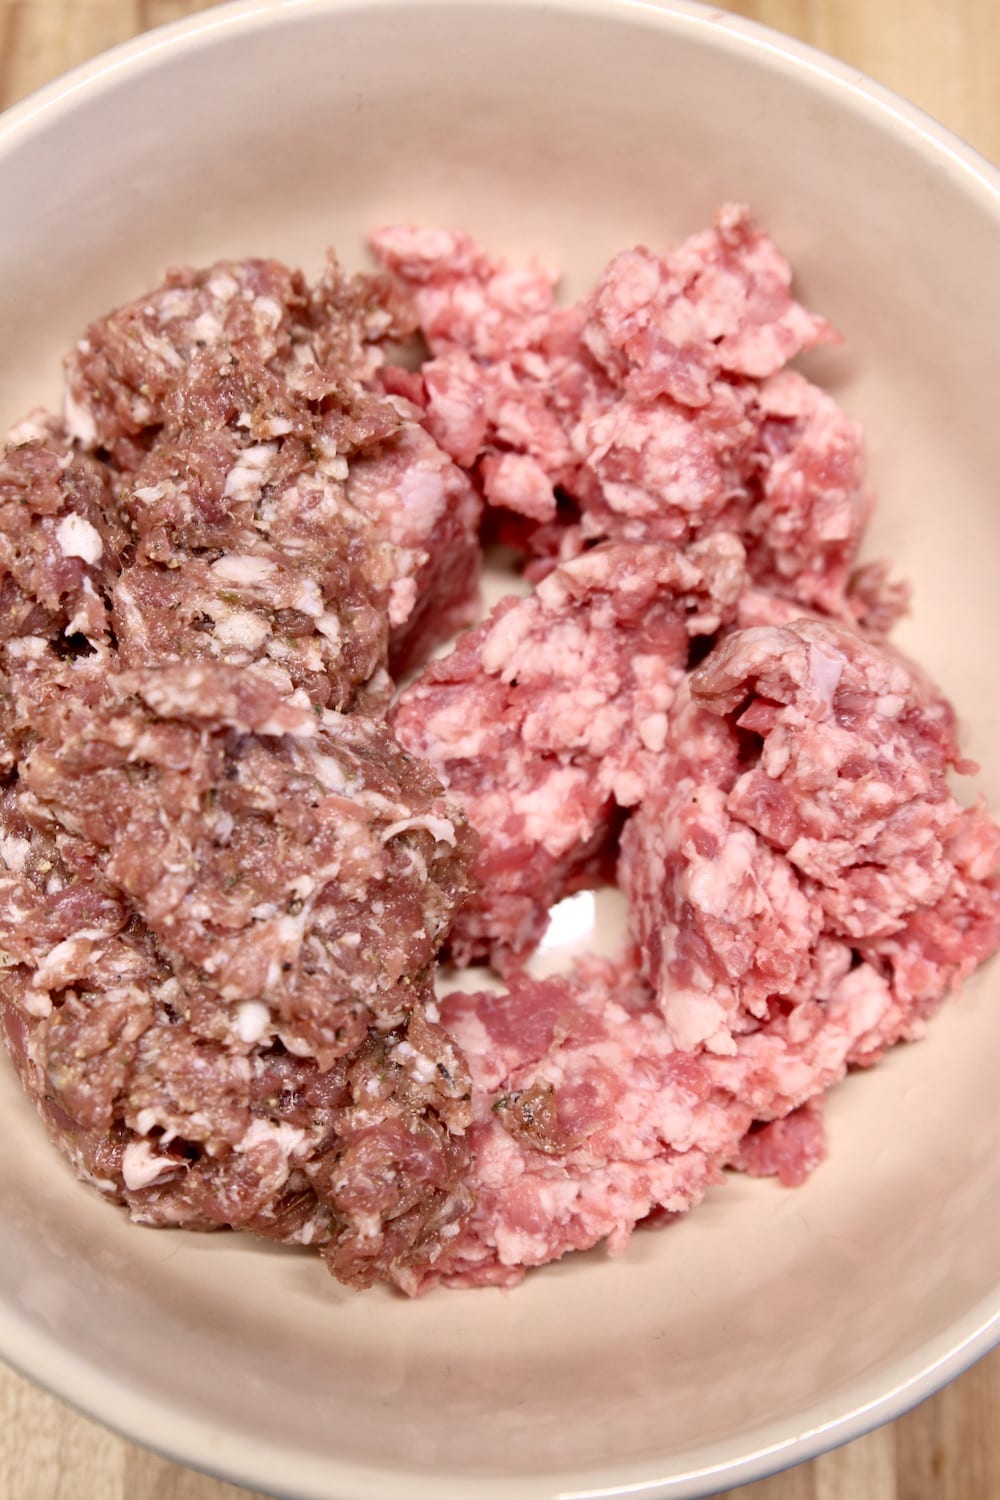 Bowl with ground sausage and ground beef